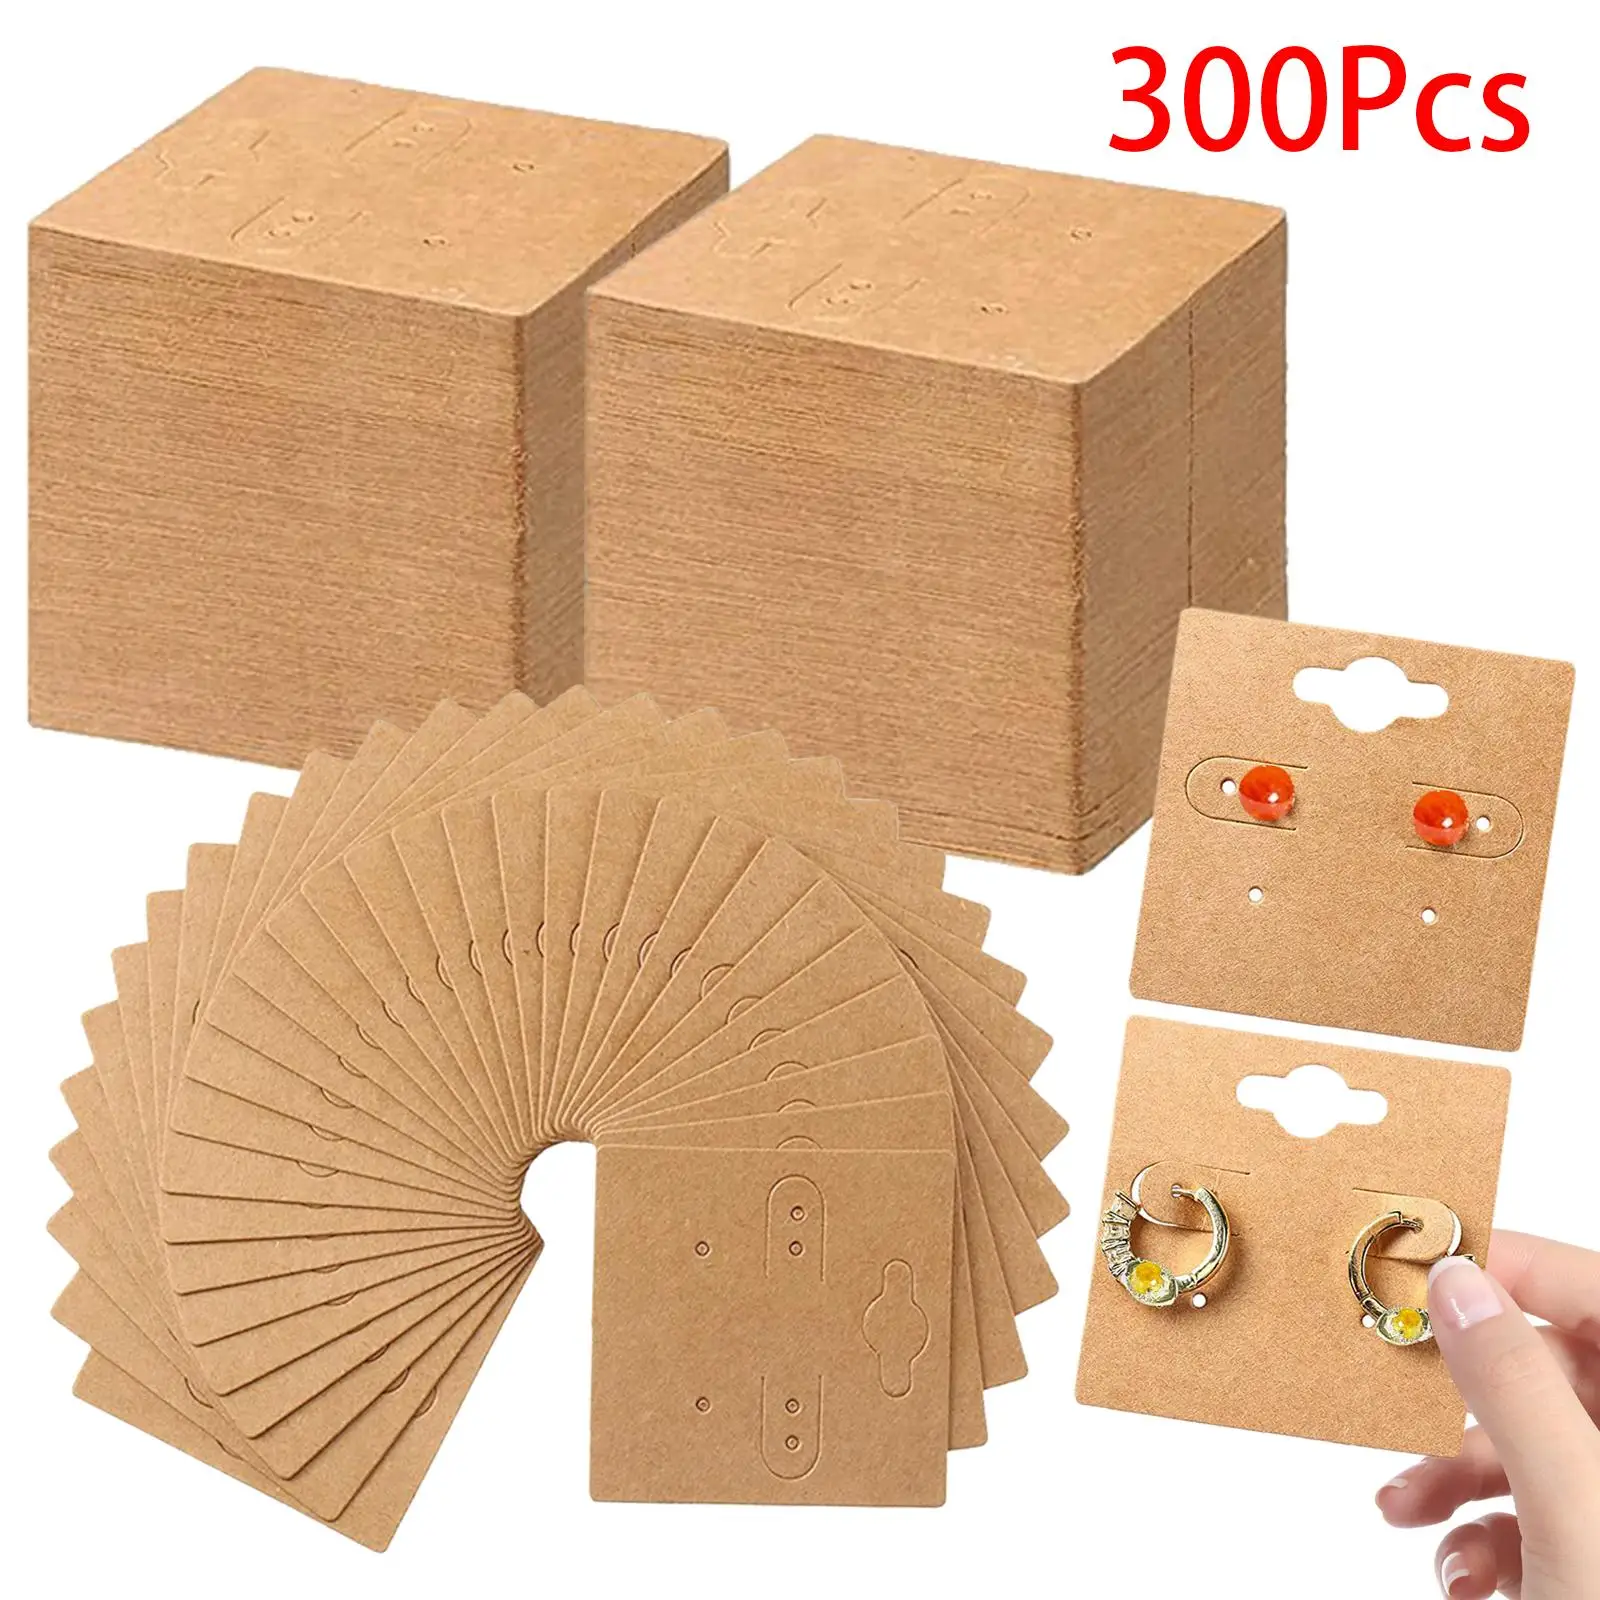 300 Pieces Kraft Paper Earring Display Cards Earring Studs Cards for Retail DIY Crafts Store Trade Show Mall Business Packaging